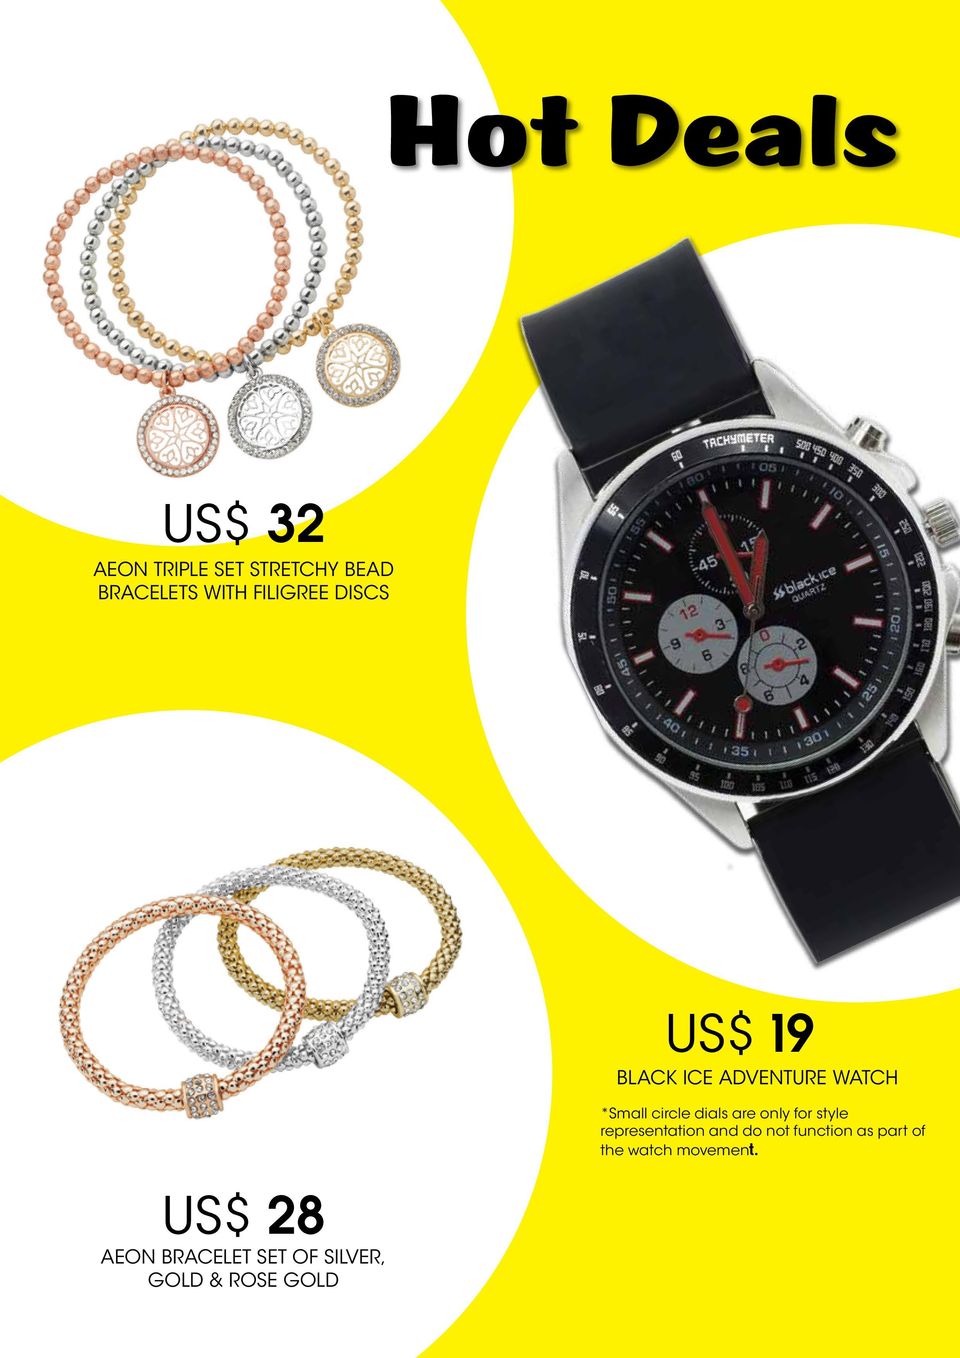 Gold US$ 19 Black Ice Adventure Watch *Small circle dials are only